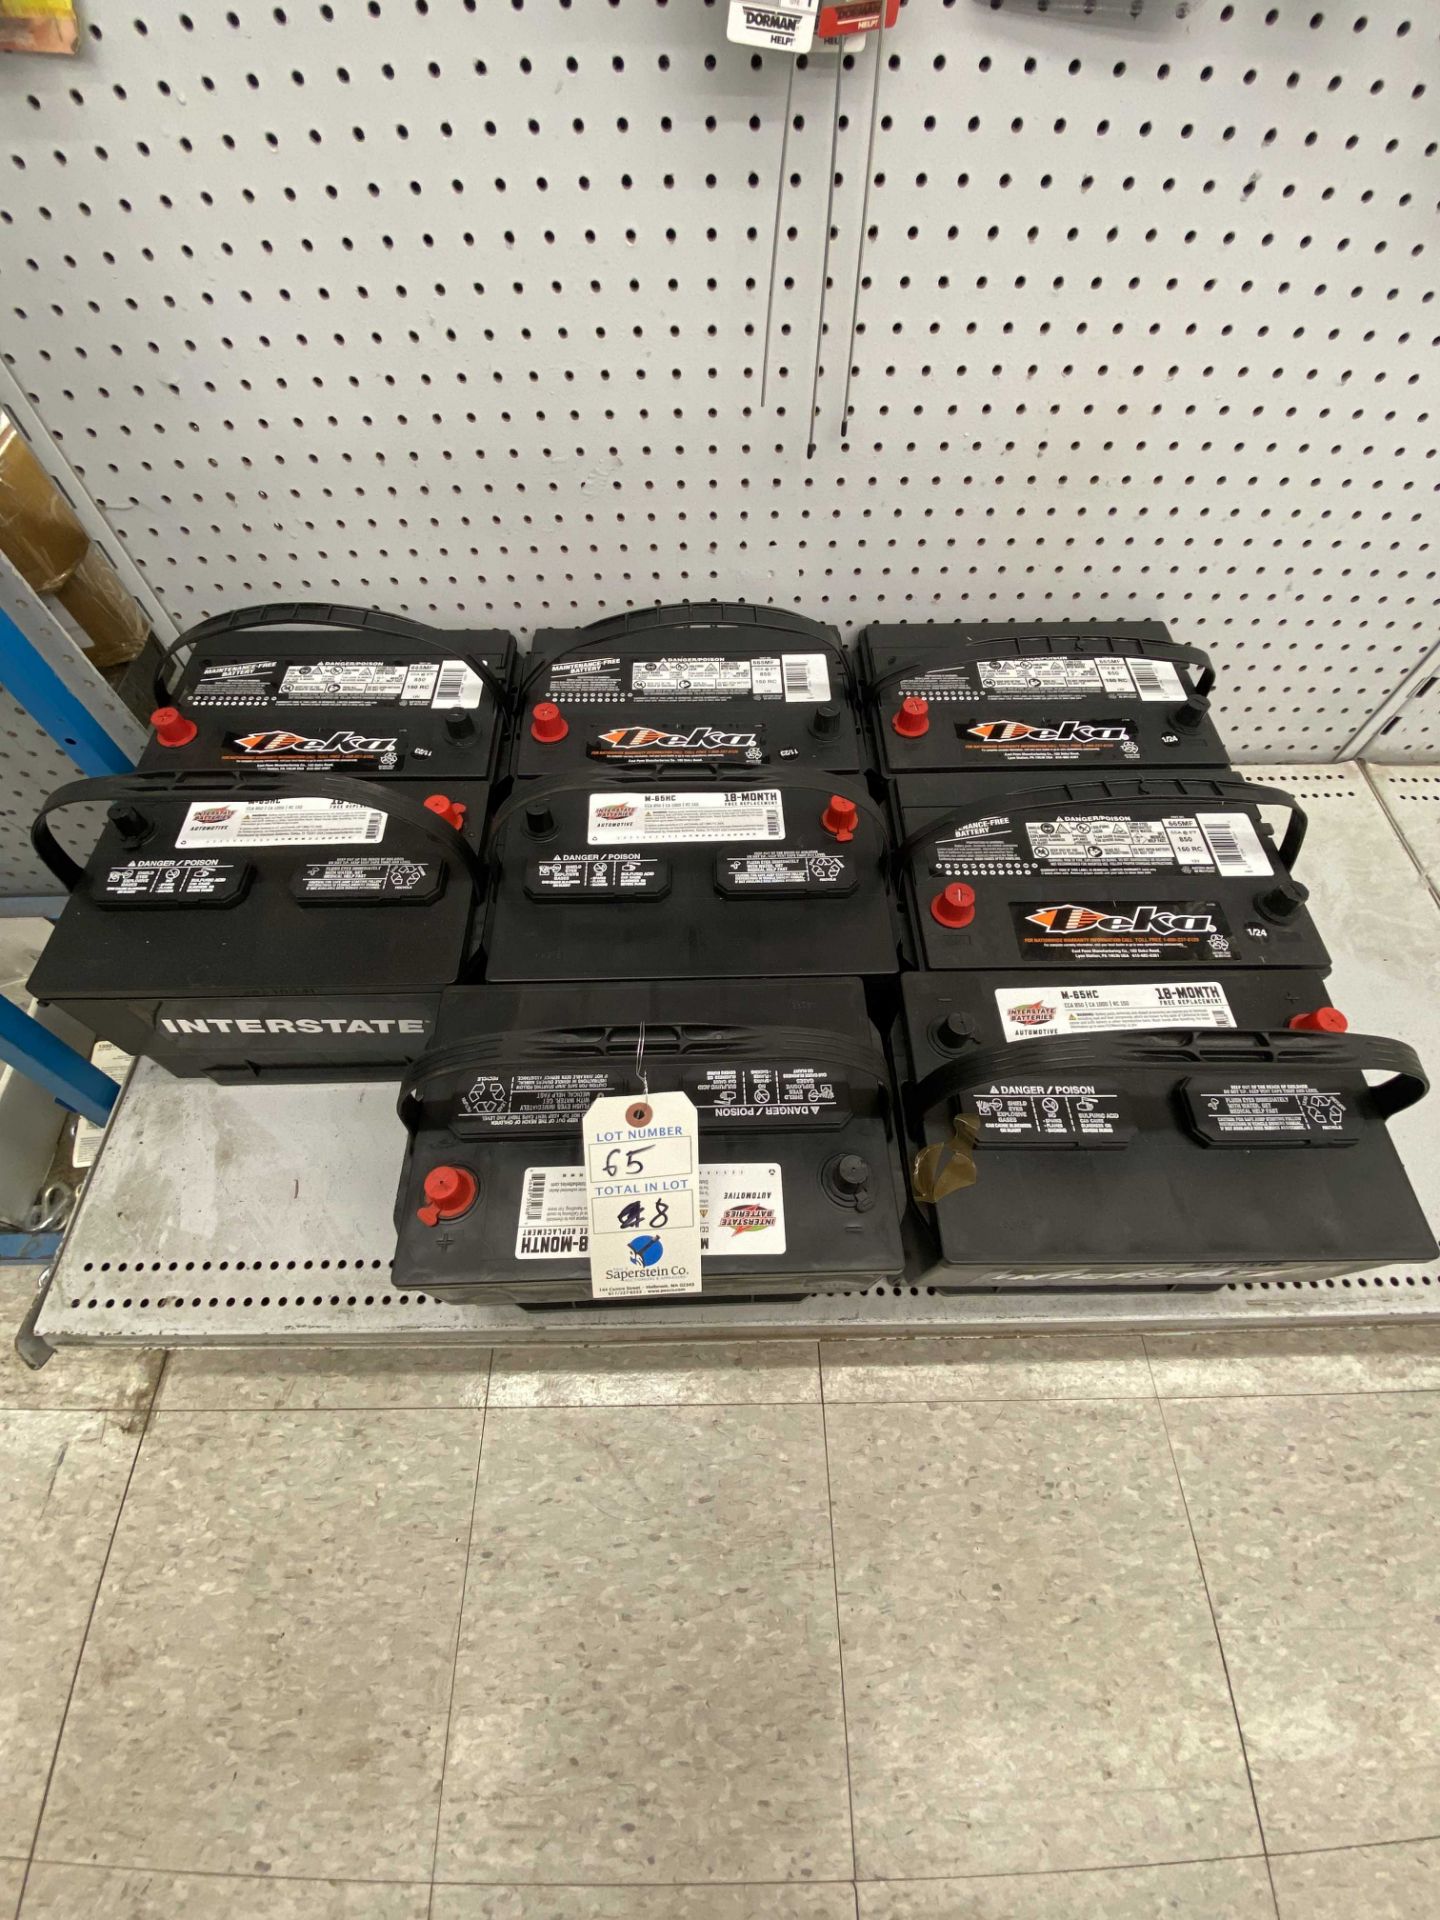 {LOT} (8) Interstate & Deka Group 65, 12V Batteries 850 Cranking Amps (BEING SOLD BY LOT)